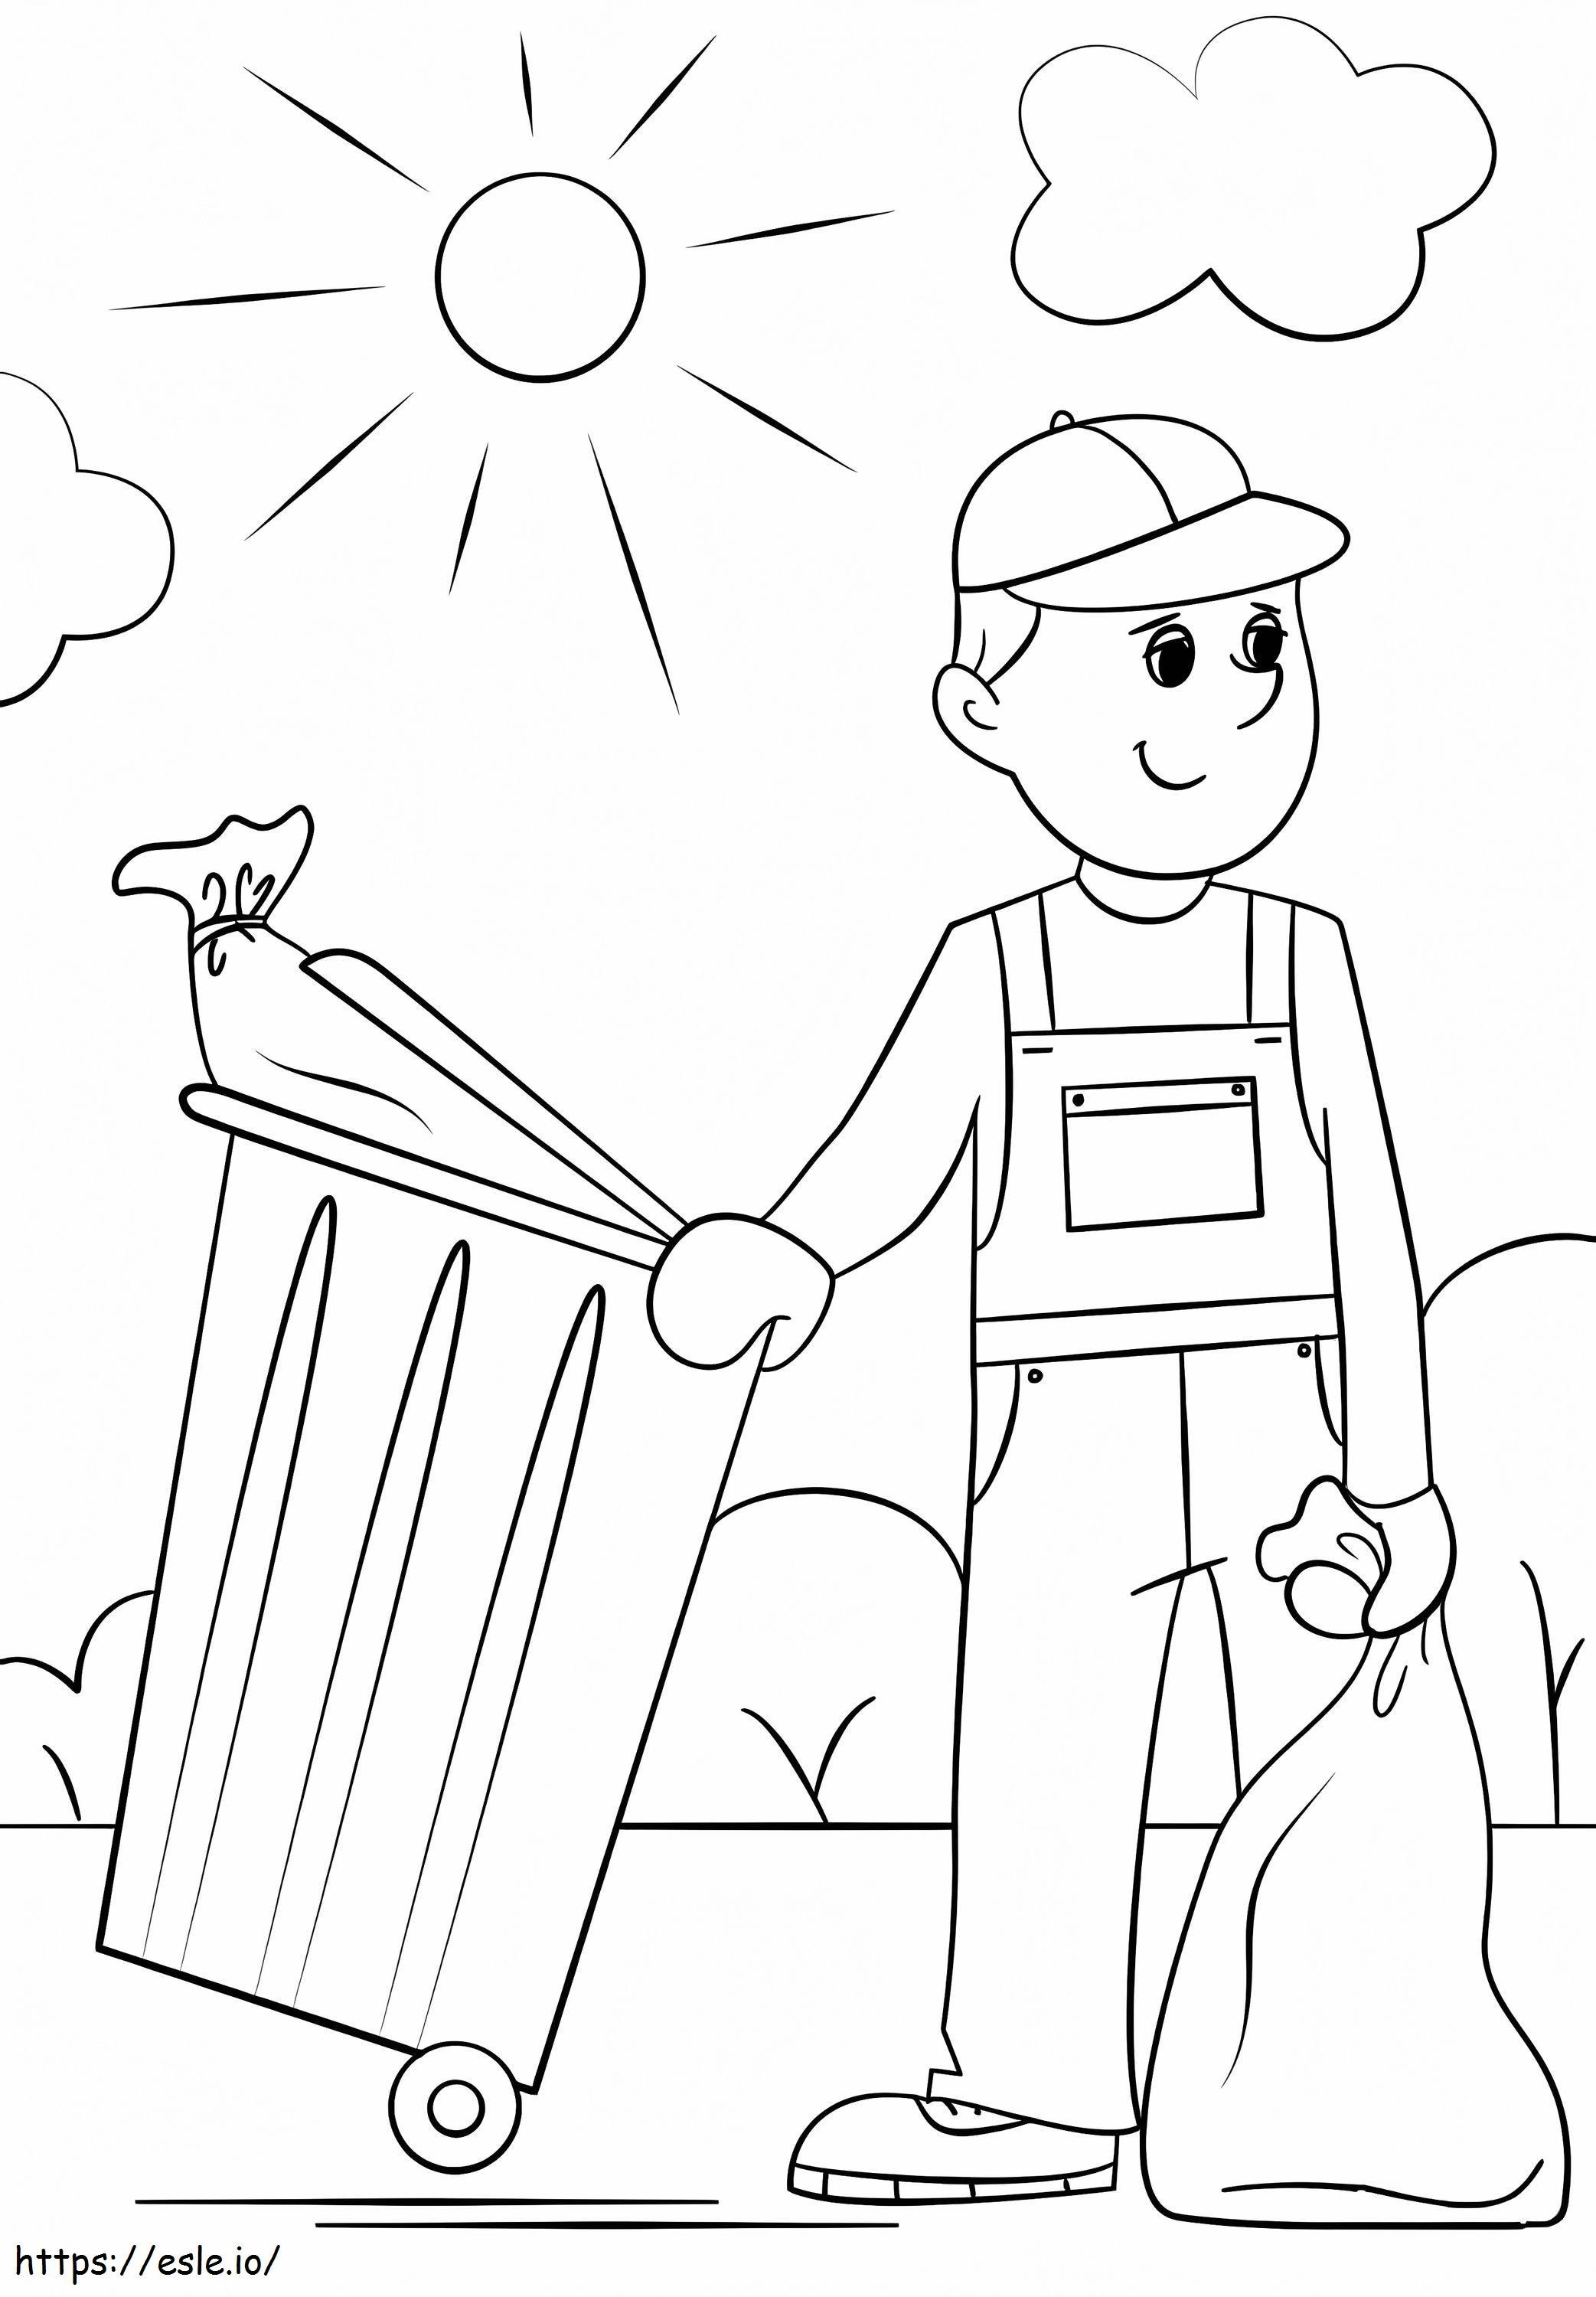 Garbage Collector coloring page